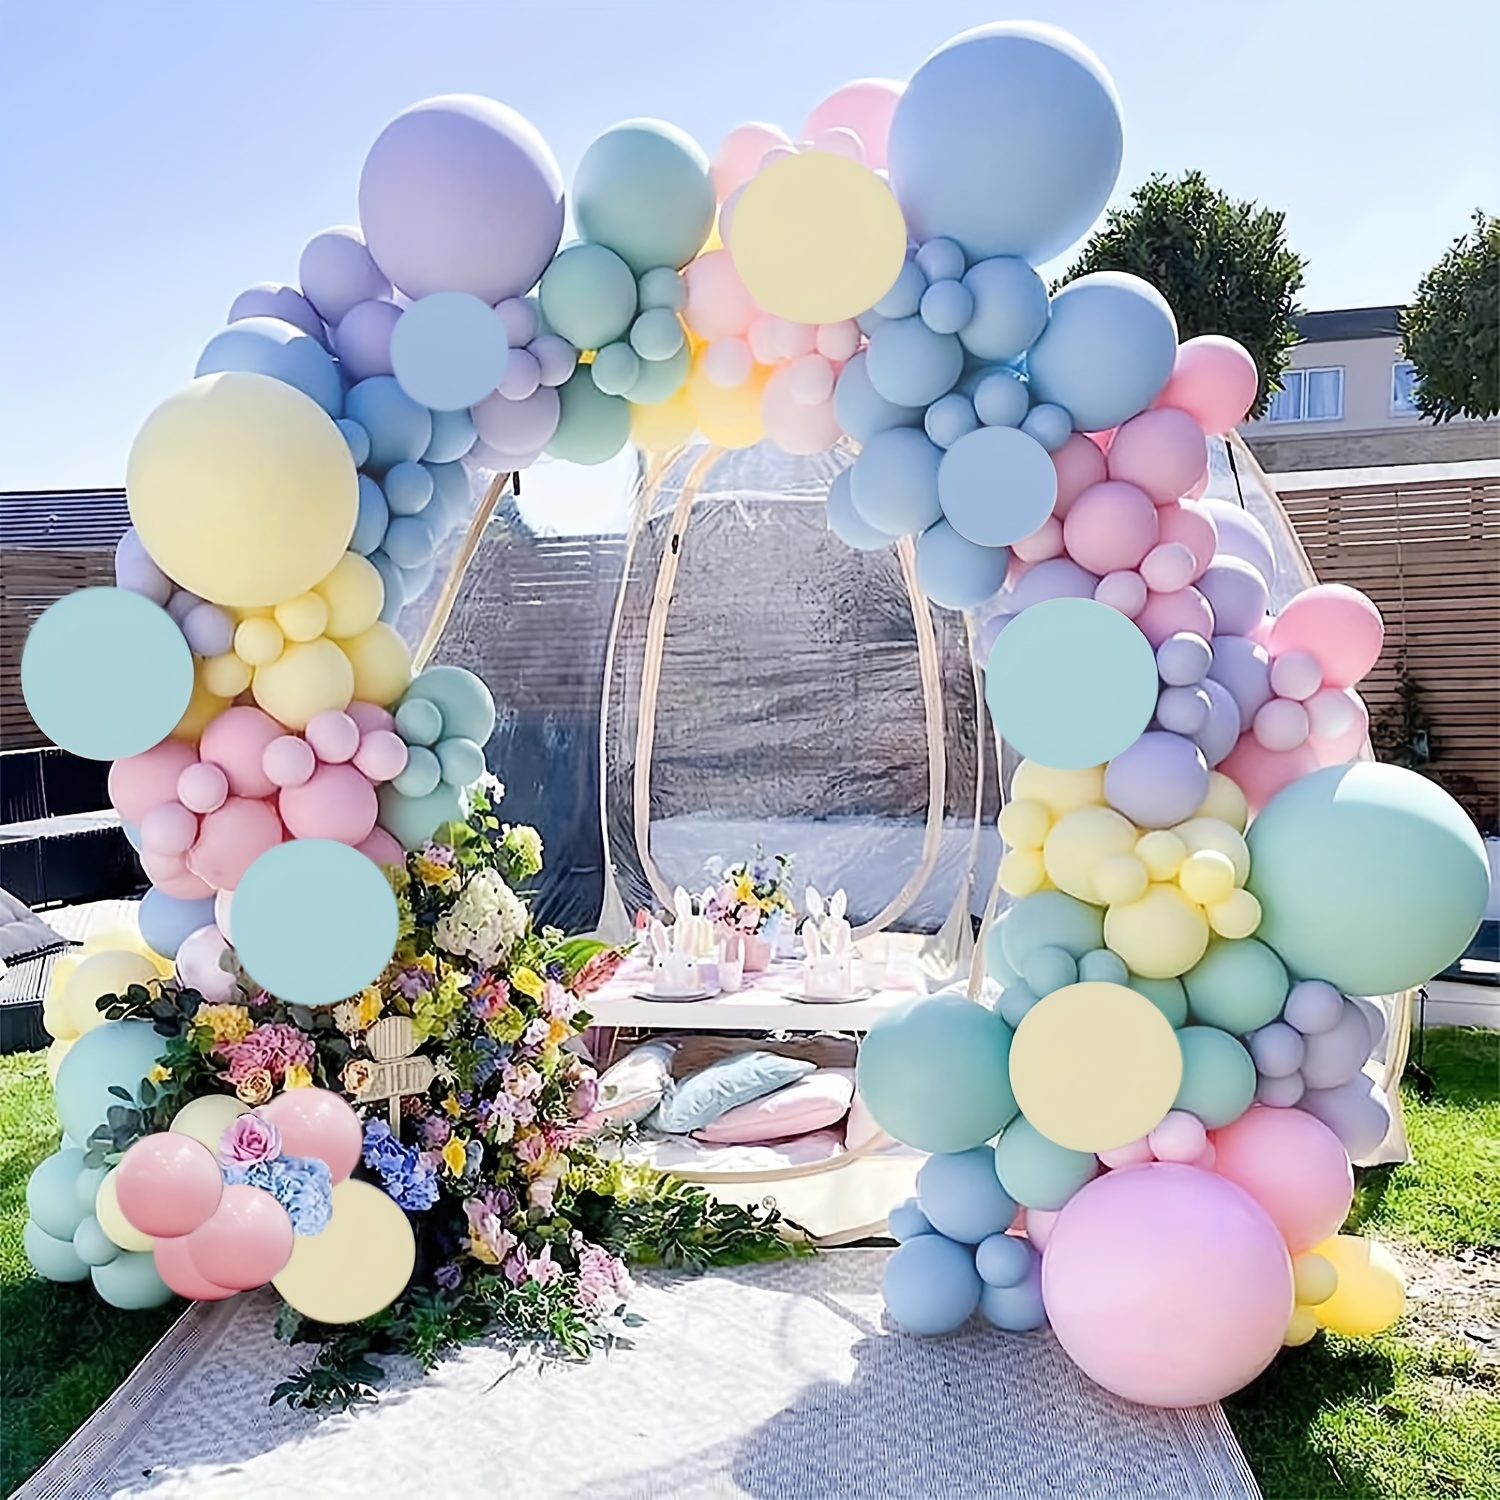 

125pcs Pastel Balloons Arch Garland Kit, Rainbow Balloons Assorted Macaron Colorful Balloons For Magical Unicorn Baby Shower Ice Cream Party Supplies